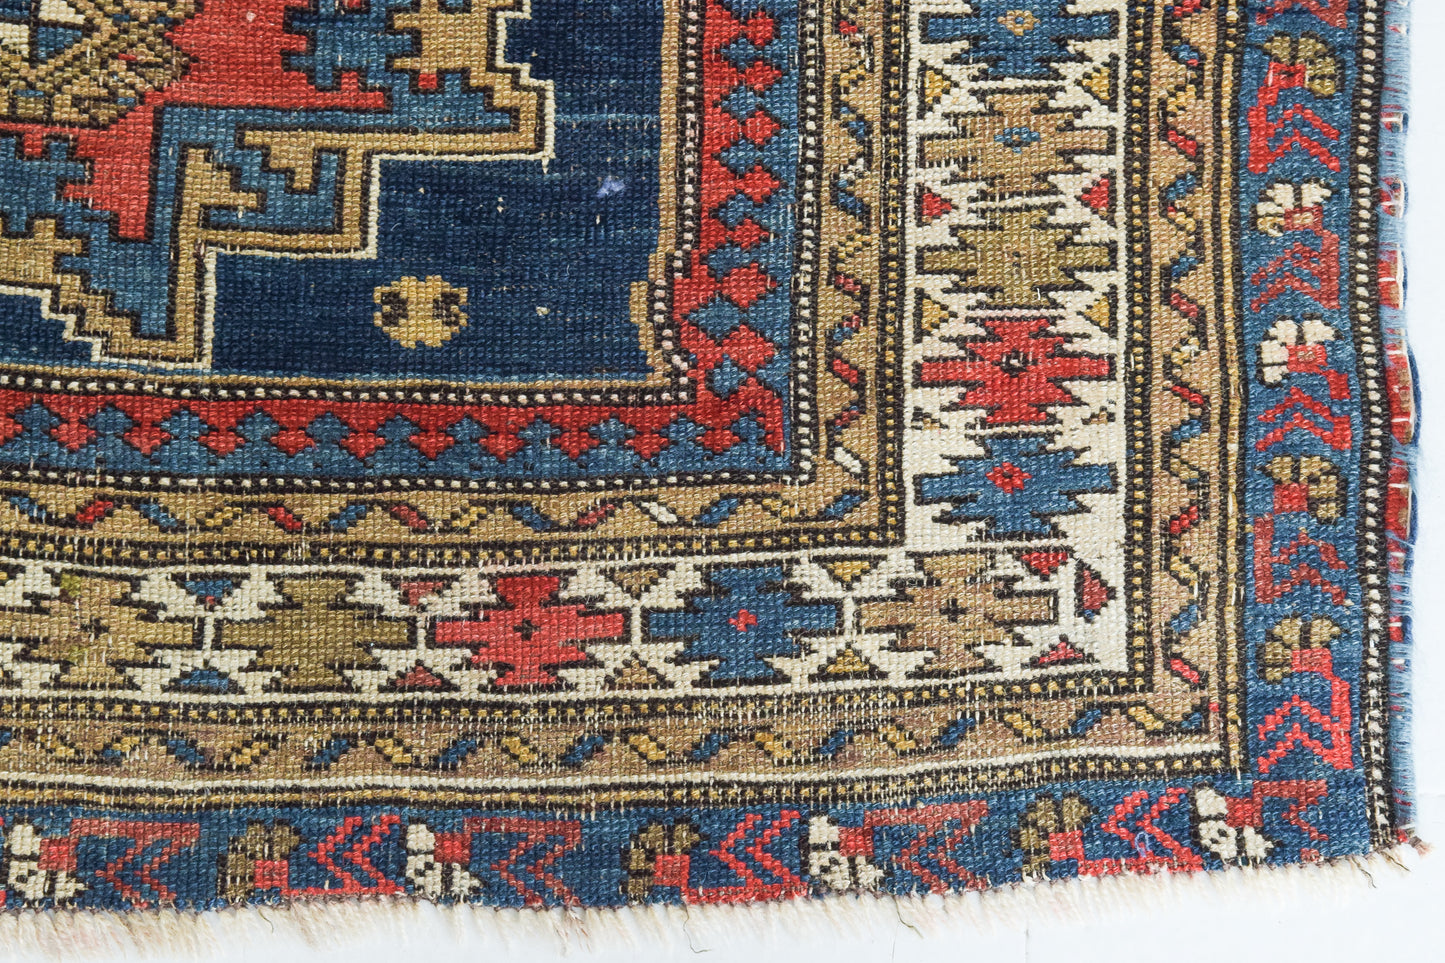 Handwoven Blue Ground Persian Rug with Bird-like Figures